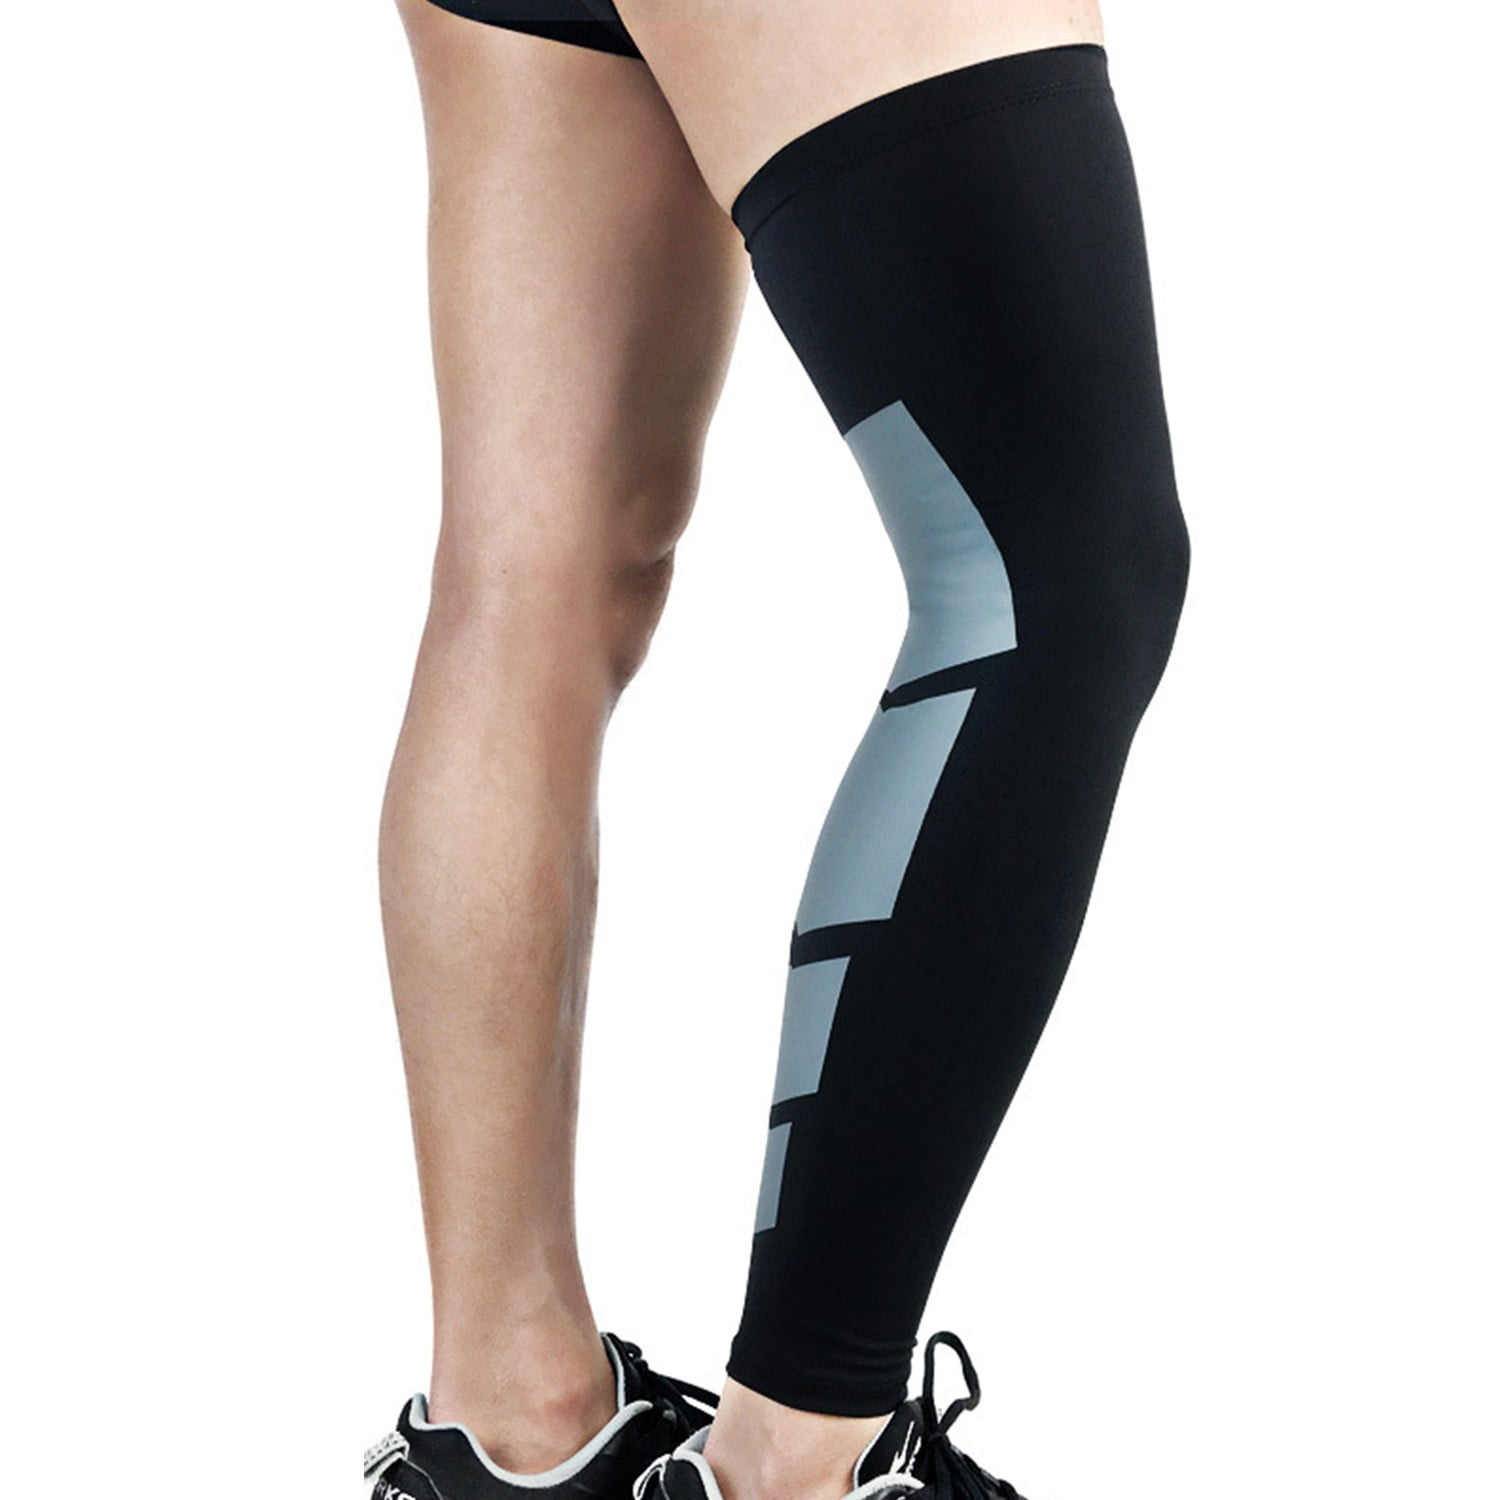 Non-Slip Inner Bands-M 1 Pair Compression Leg Sleeves for Men Full Length Stretch Long Sleeve with Knee Support Black Women 